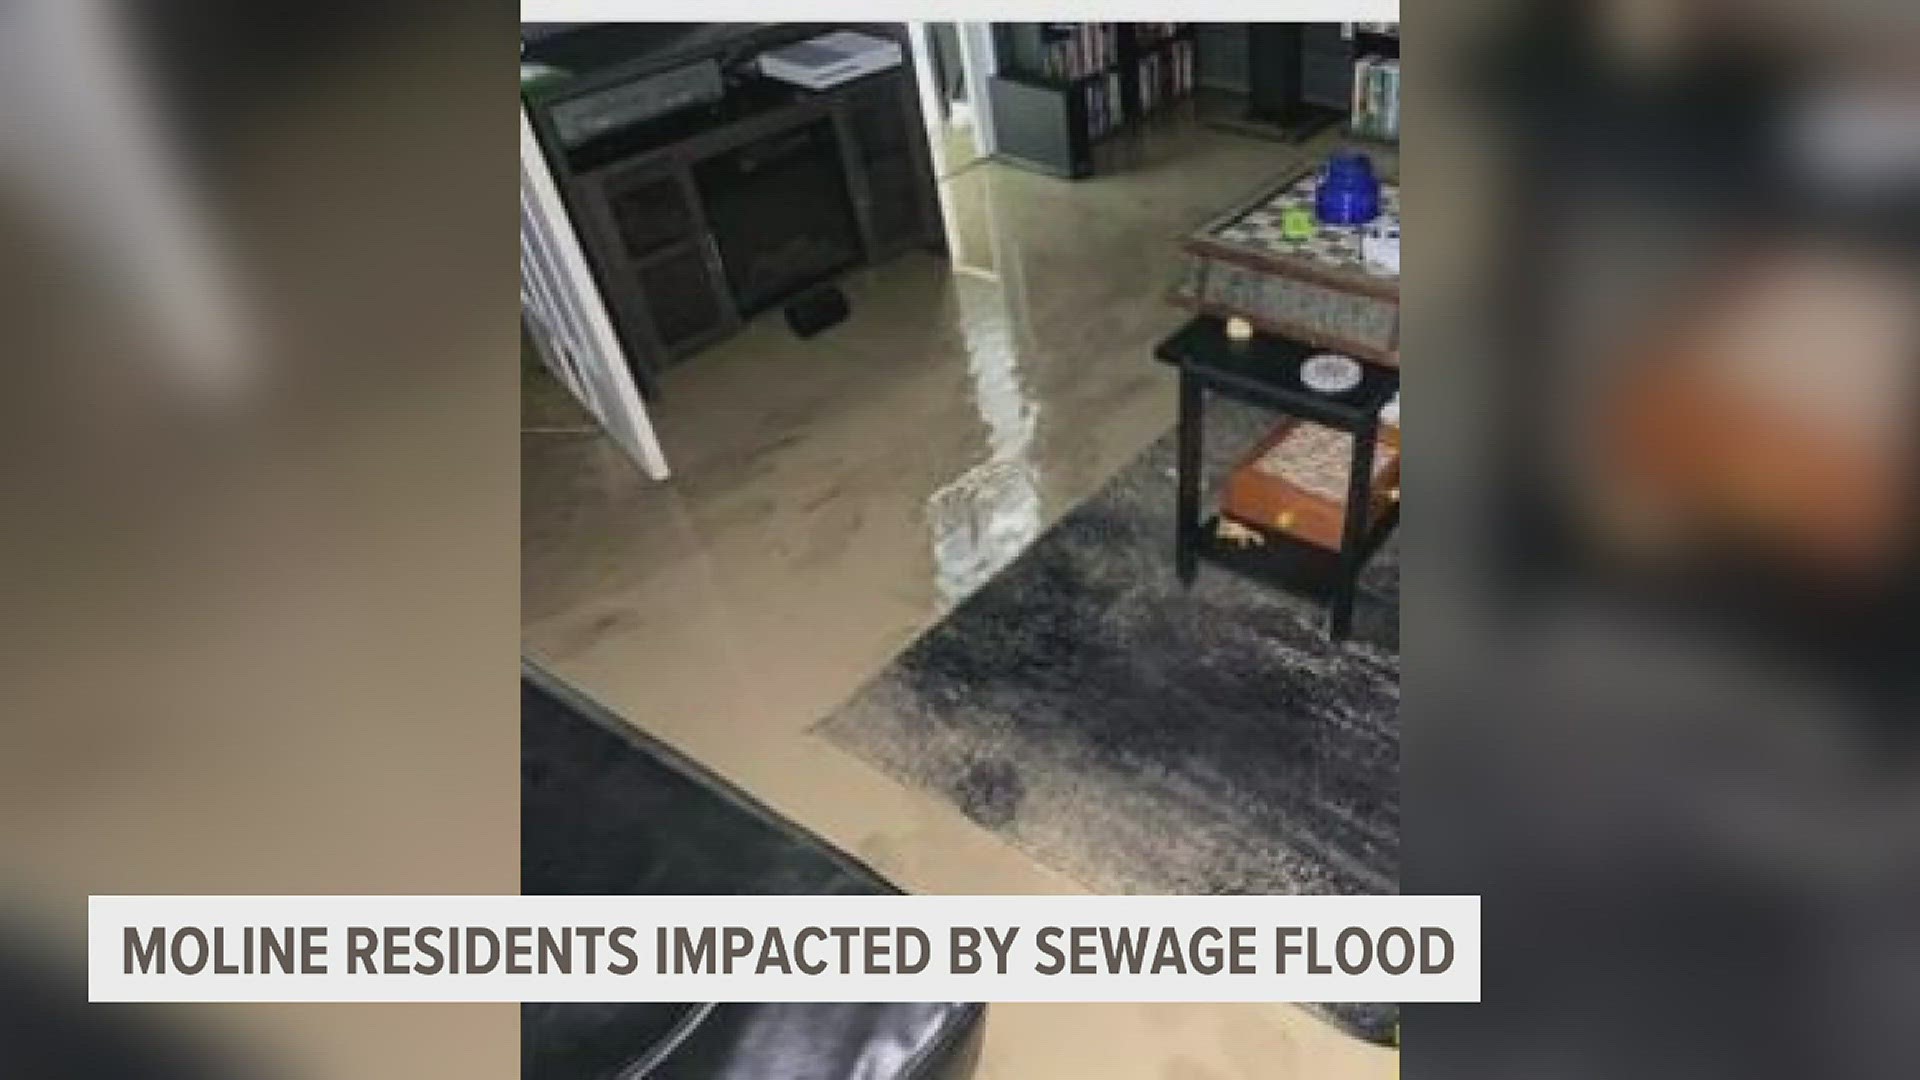 Back in June, a sewage backup impacted several residents near 47th Street and 28th Avenue.